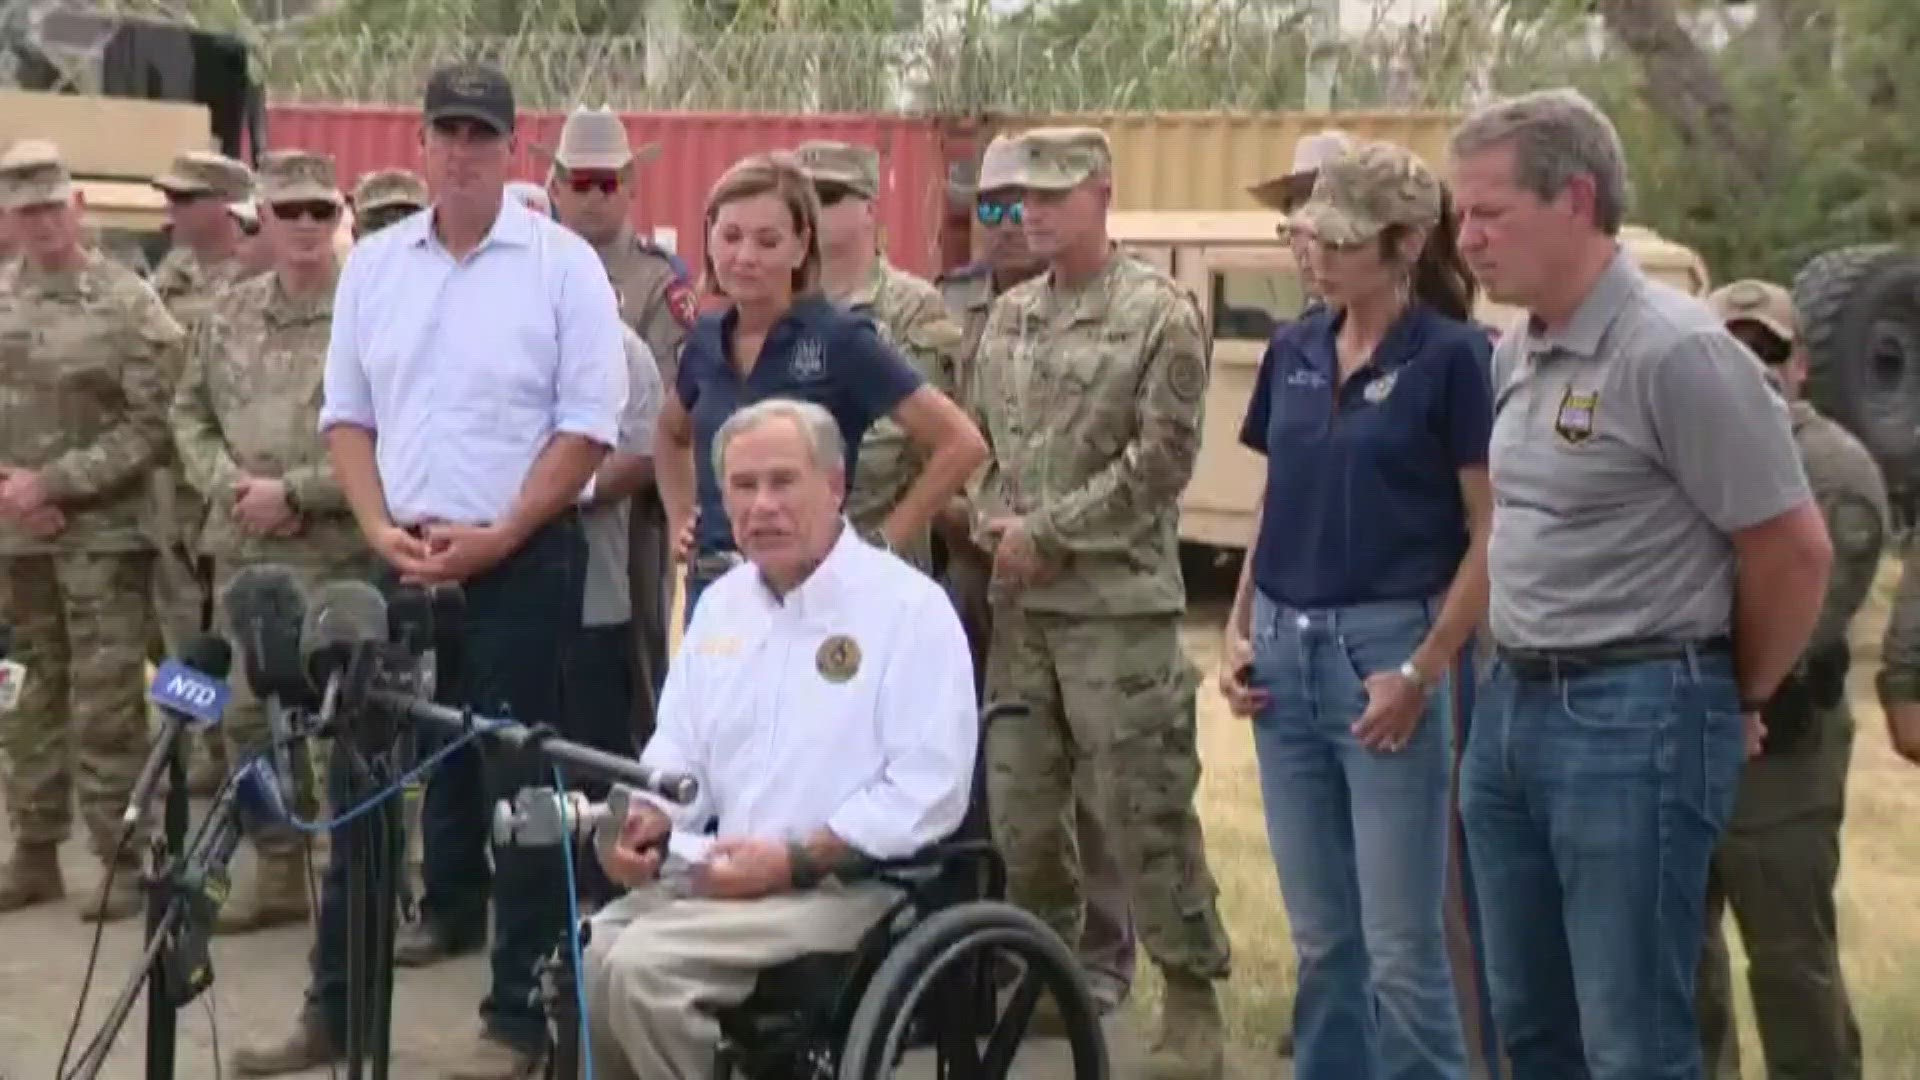 Gov. Abbott addressed his ongoing Operation Lone Star policy in the wake of what he calls "President Joe Biden's reckless open border policies."